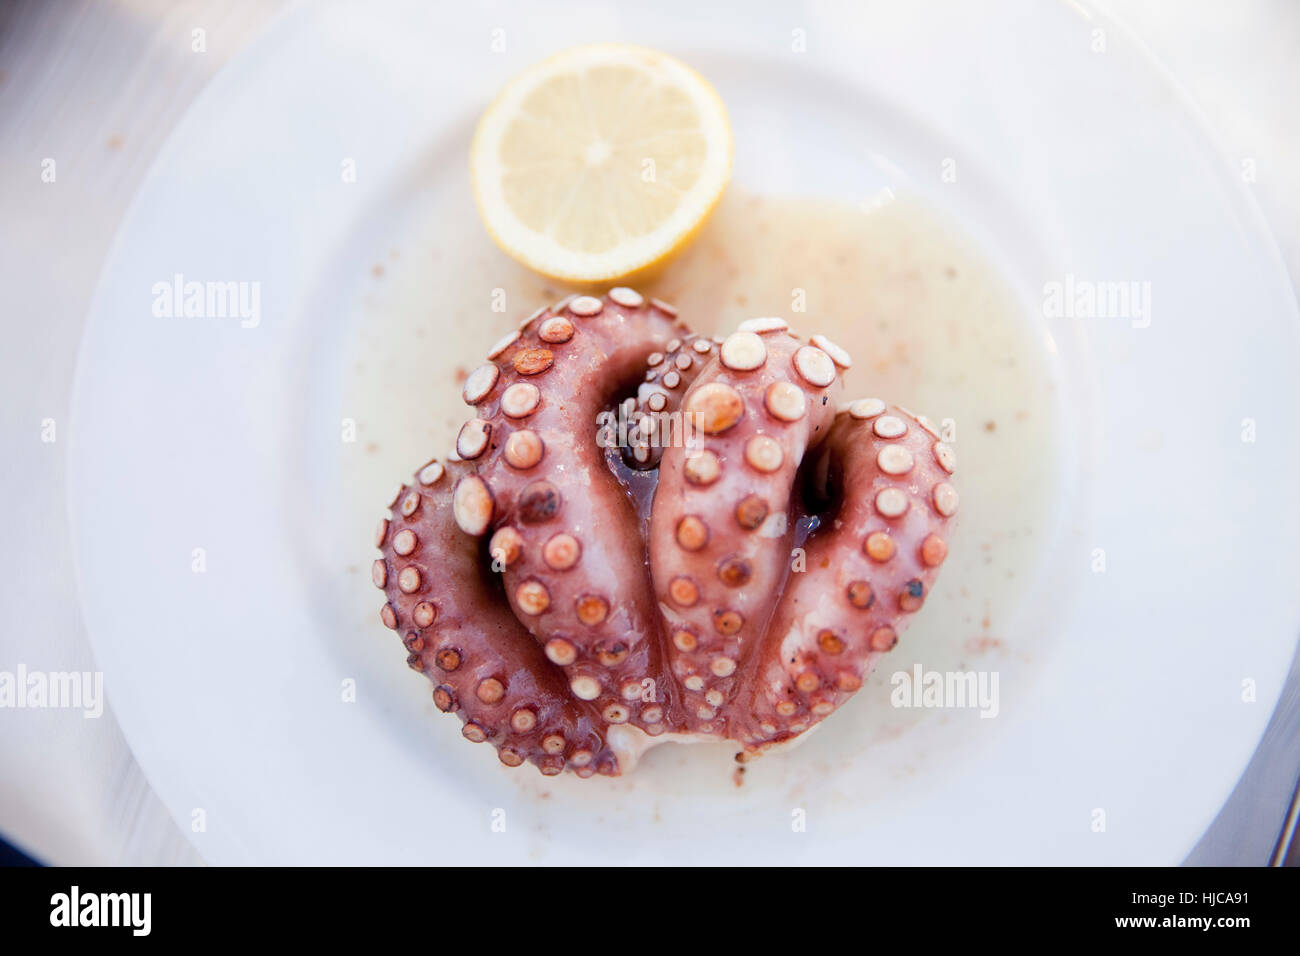 Plate of grilled octopus Stock Photo